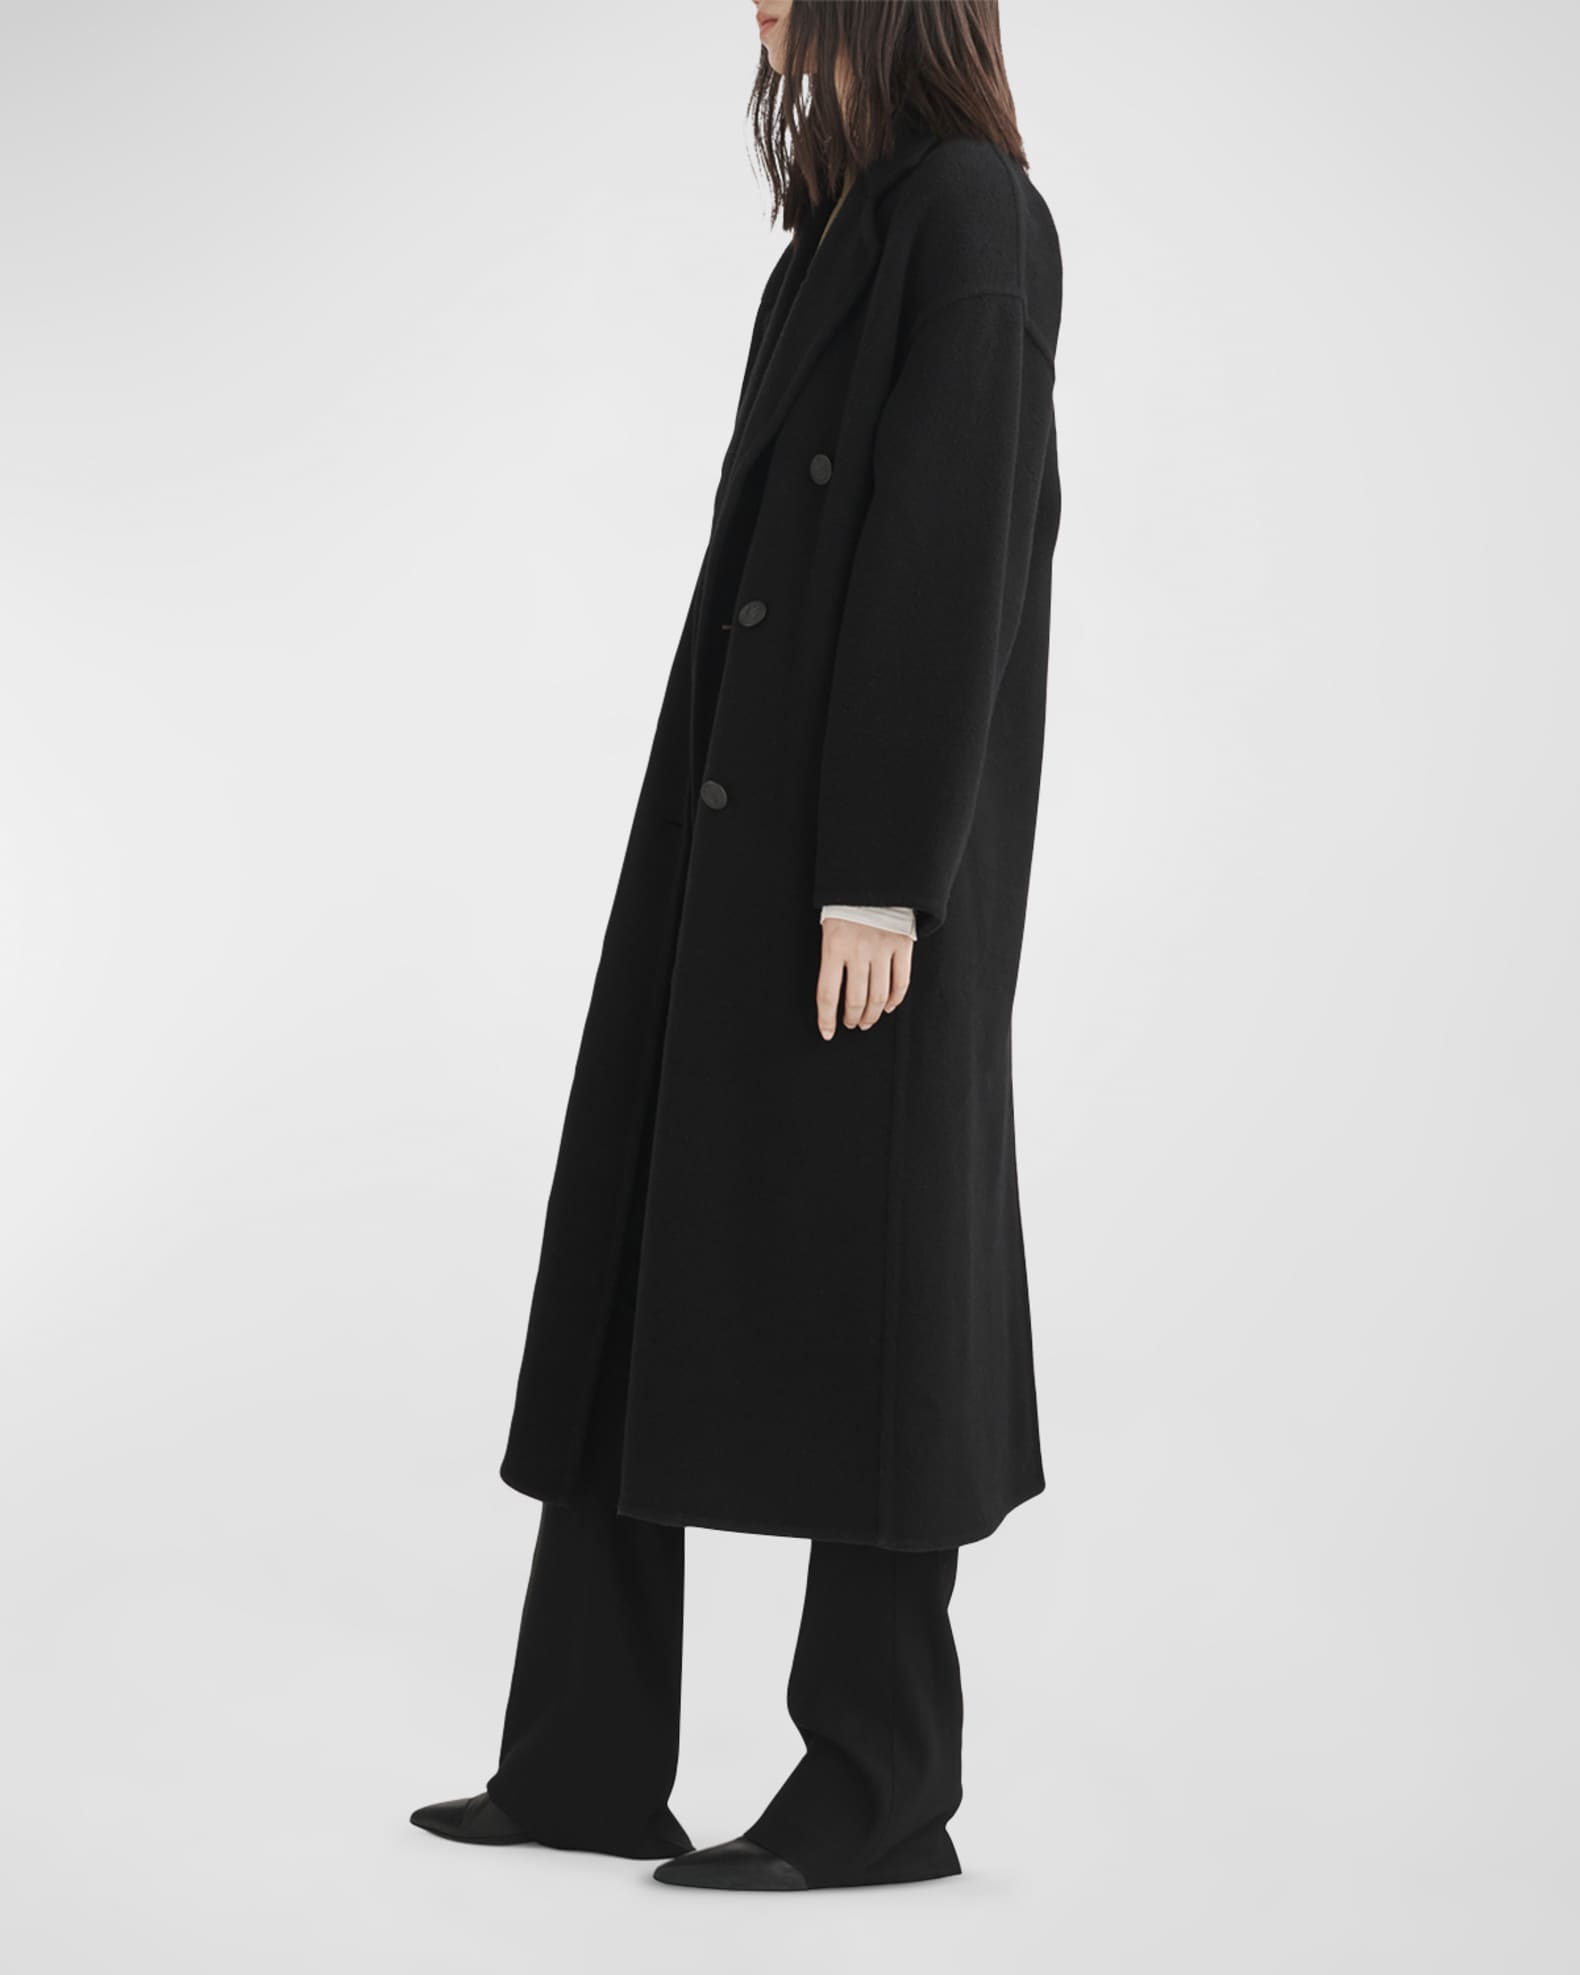 Italian Wool Double Breasted Tailored Coat